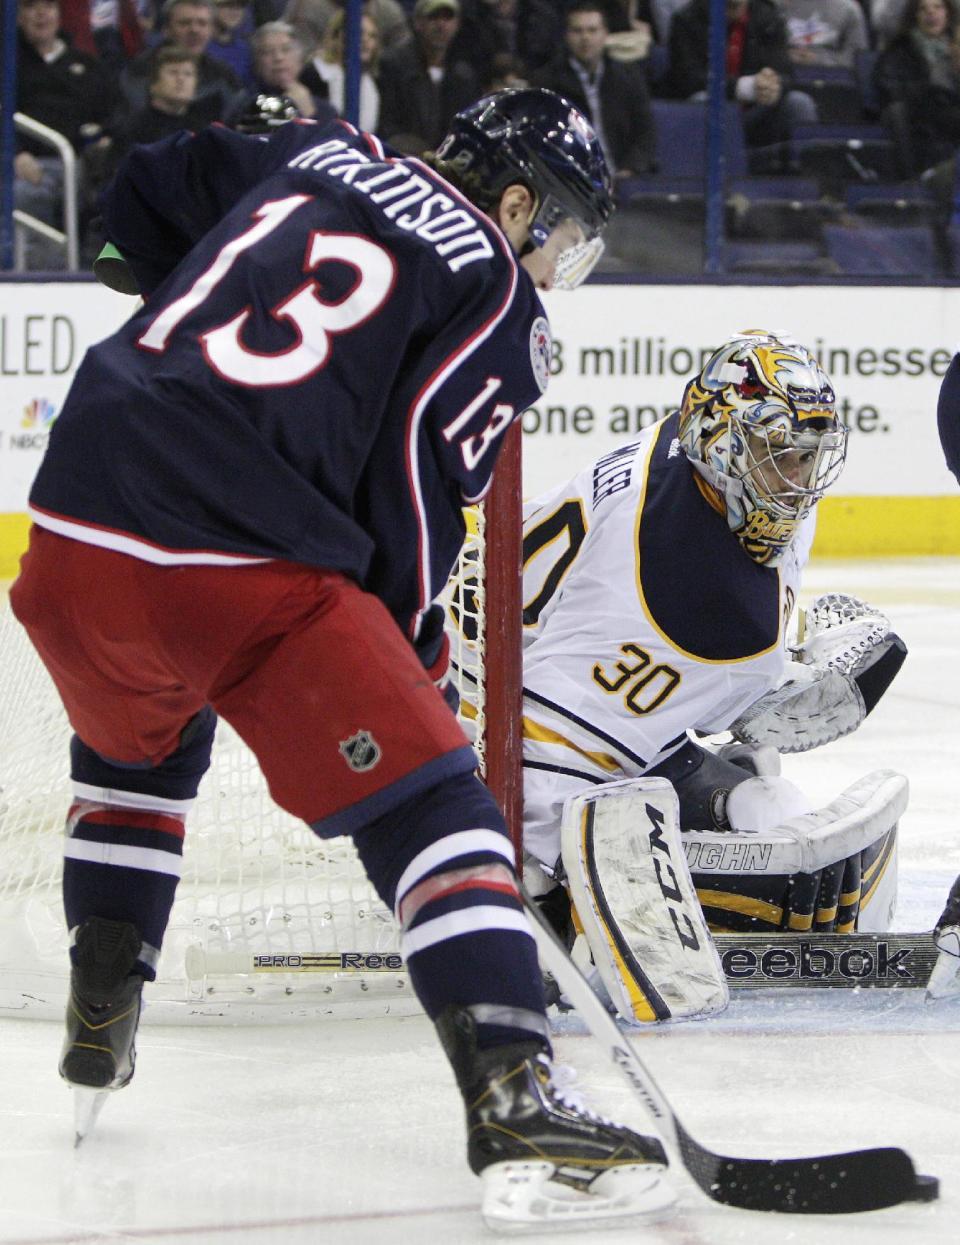 Buffalo Sabres' Ryan Miller, right, makes a save against Columbus Blue Jackets' Cam Atkinson during the second period of an NHL hockey game, Saturday, Jan. 25, 2014, in Columbus, Ohio. The Sabres won 5-2. (AP Photo/Jay LaPrete)